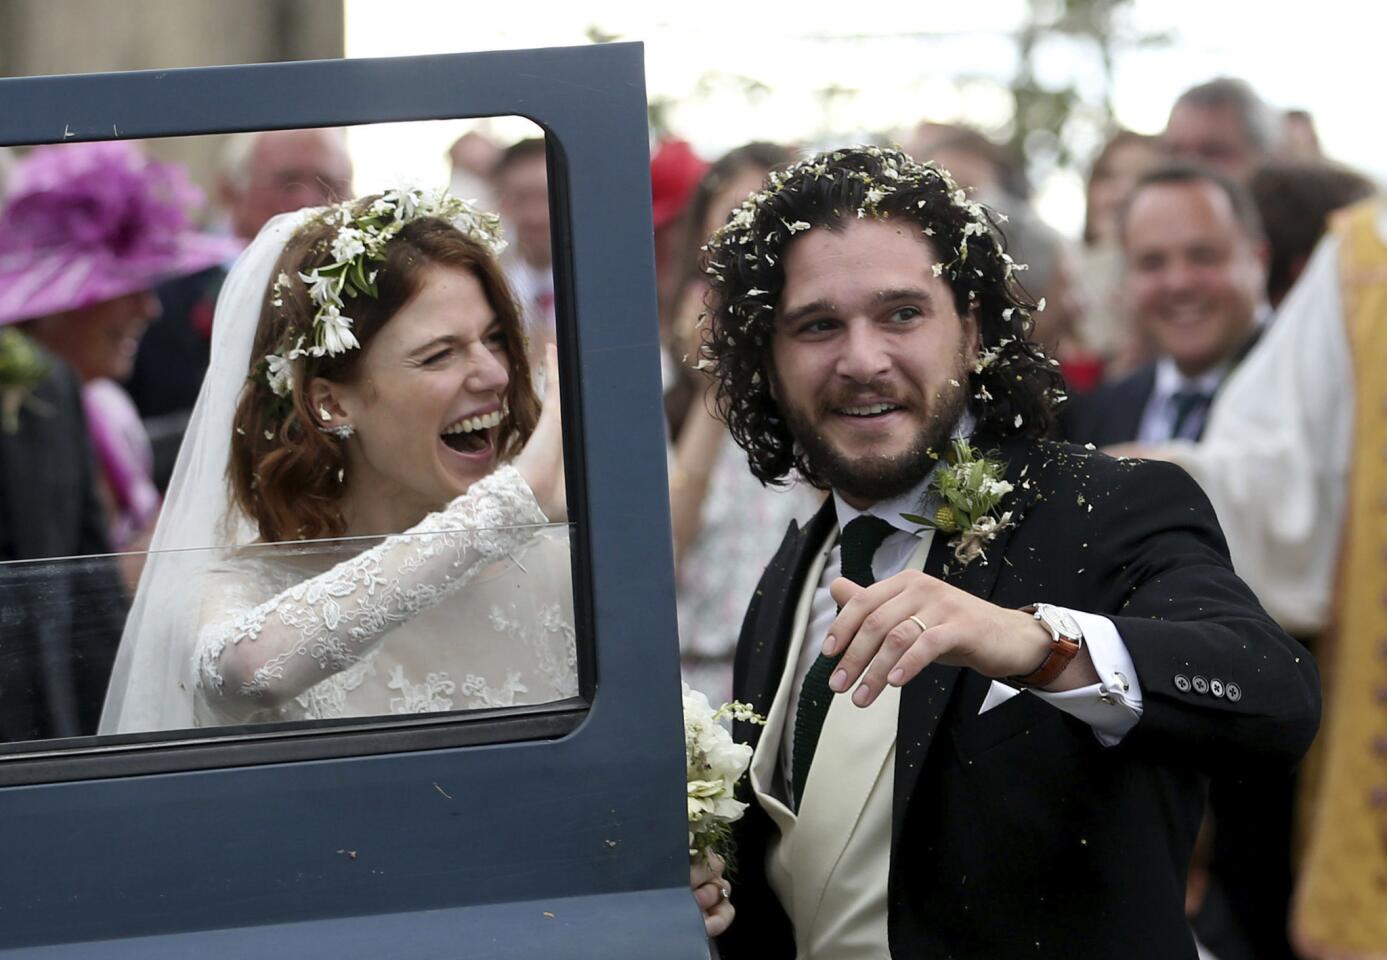 Actors Kit Harington and Rose Leslie depart after their wedding ceremony at Rayne Church, Kirkton of Rayne in Aberdeenshire, Scotland, on Saturday, June 23, 2018.